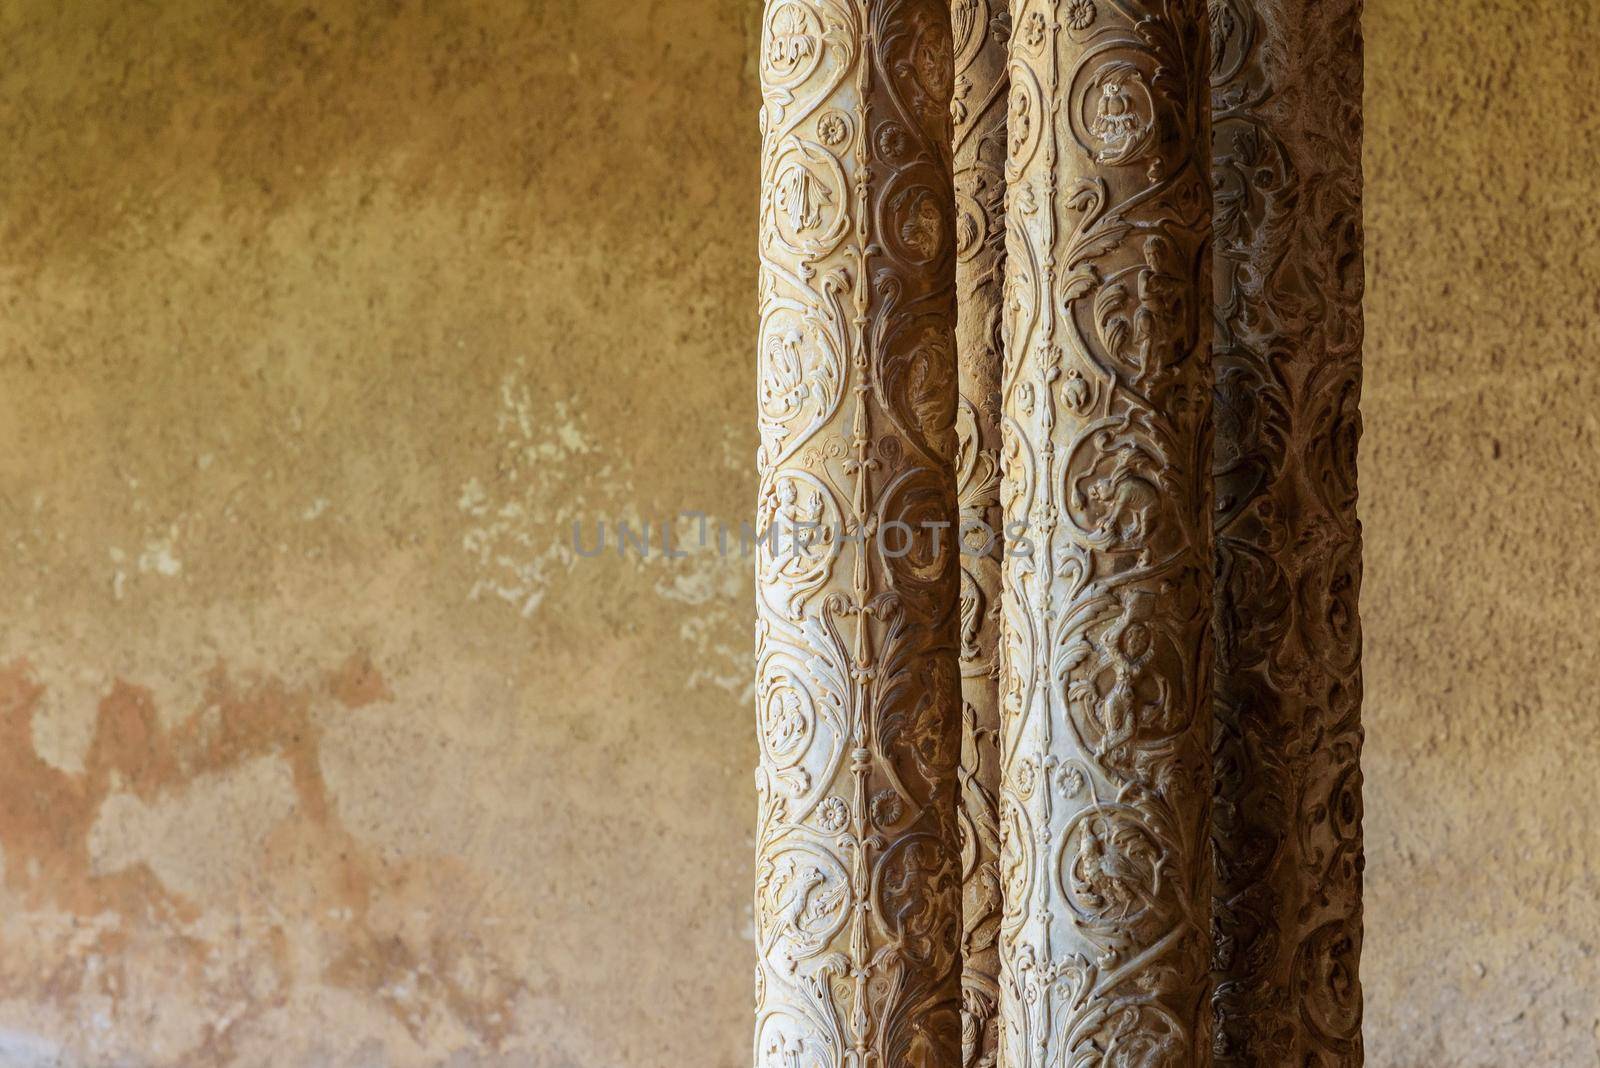 Decorated columns in Monreale Abbey by mkos83